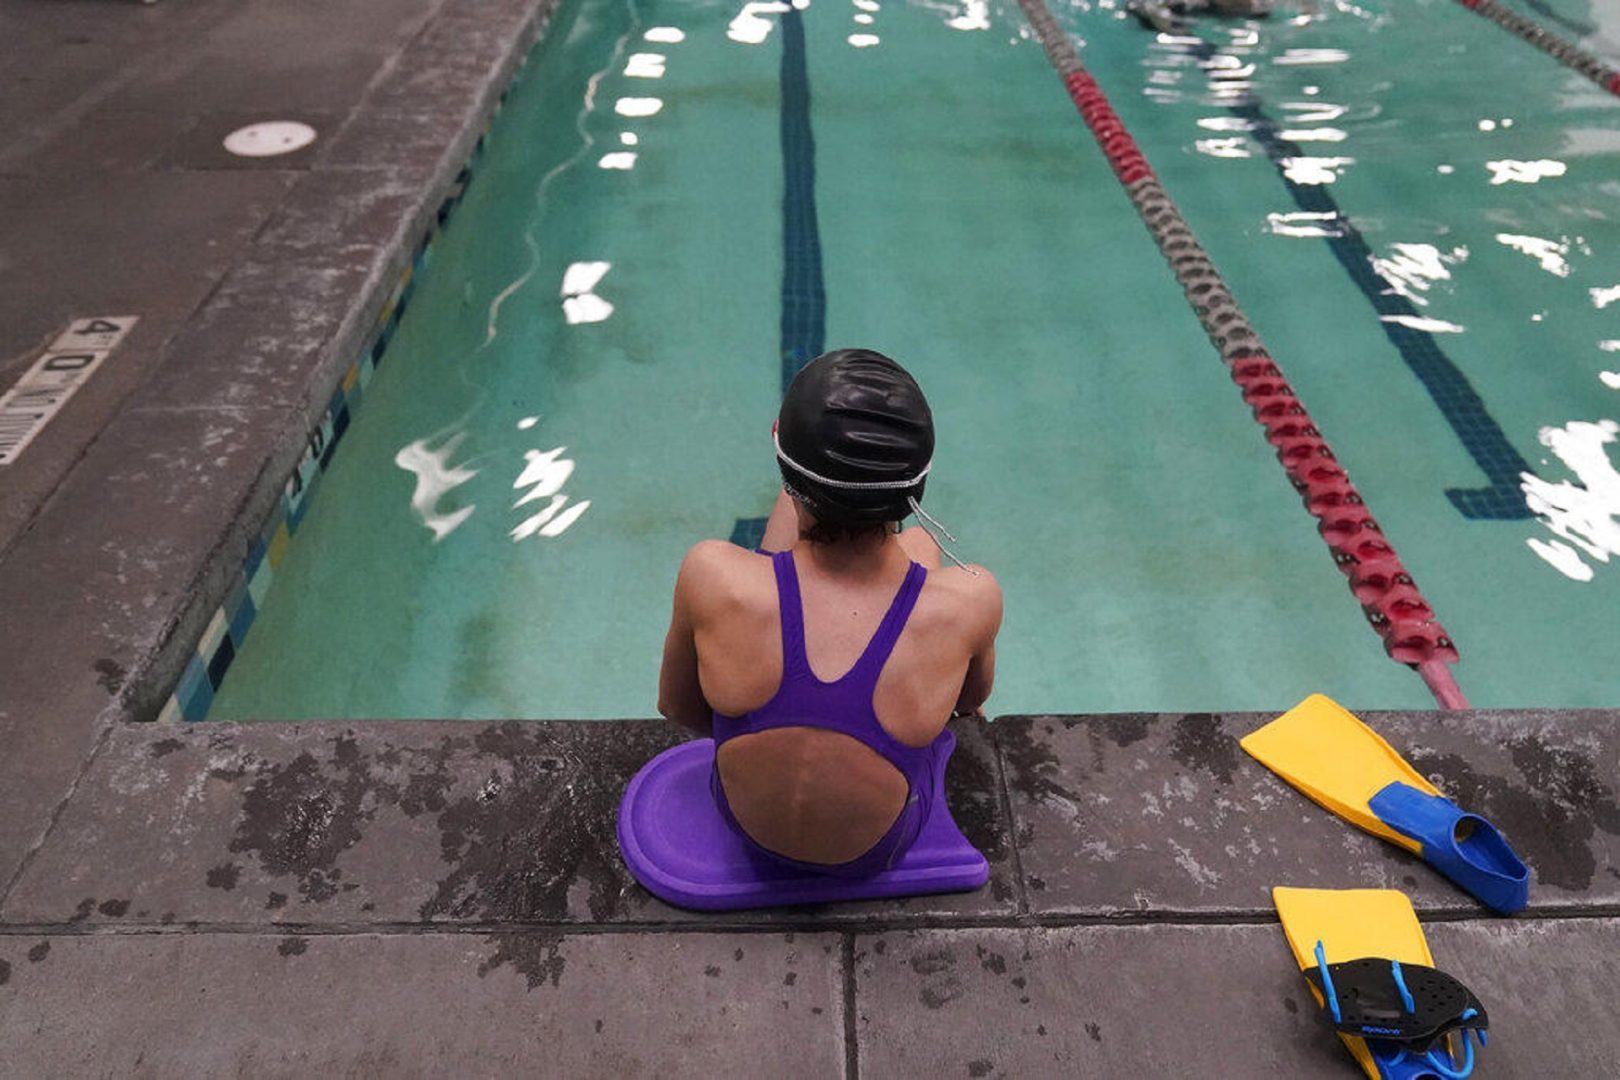 A proposed ban on transgender athletes playing female school sports in Utah would affect transgender girls like this 12-year-old swimmer seen at a pool in Utah on Feb. 22, 2021. She and her family spoke with The Associated Press on the condition of anonymity to avoid outing her publicly.